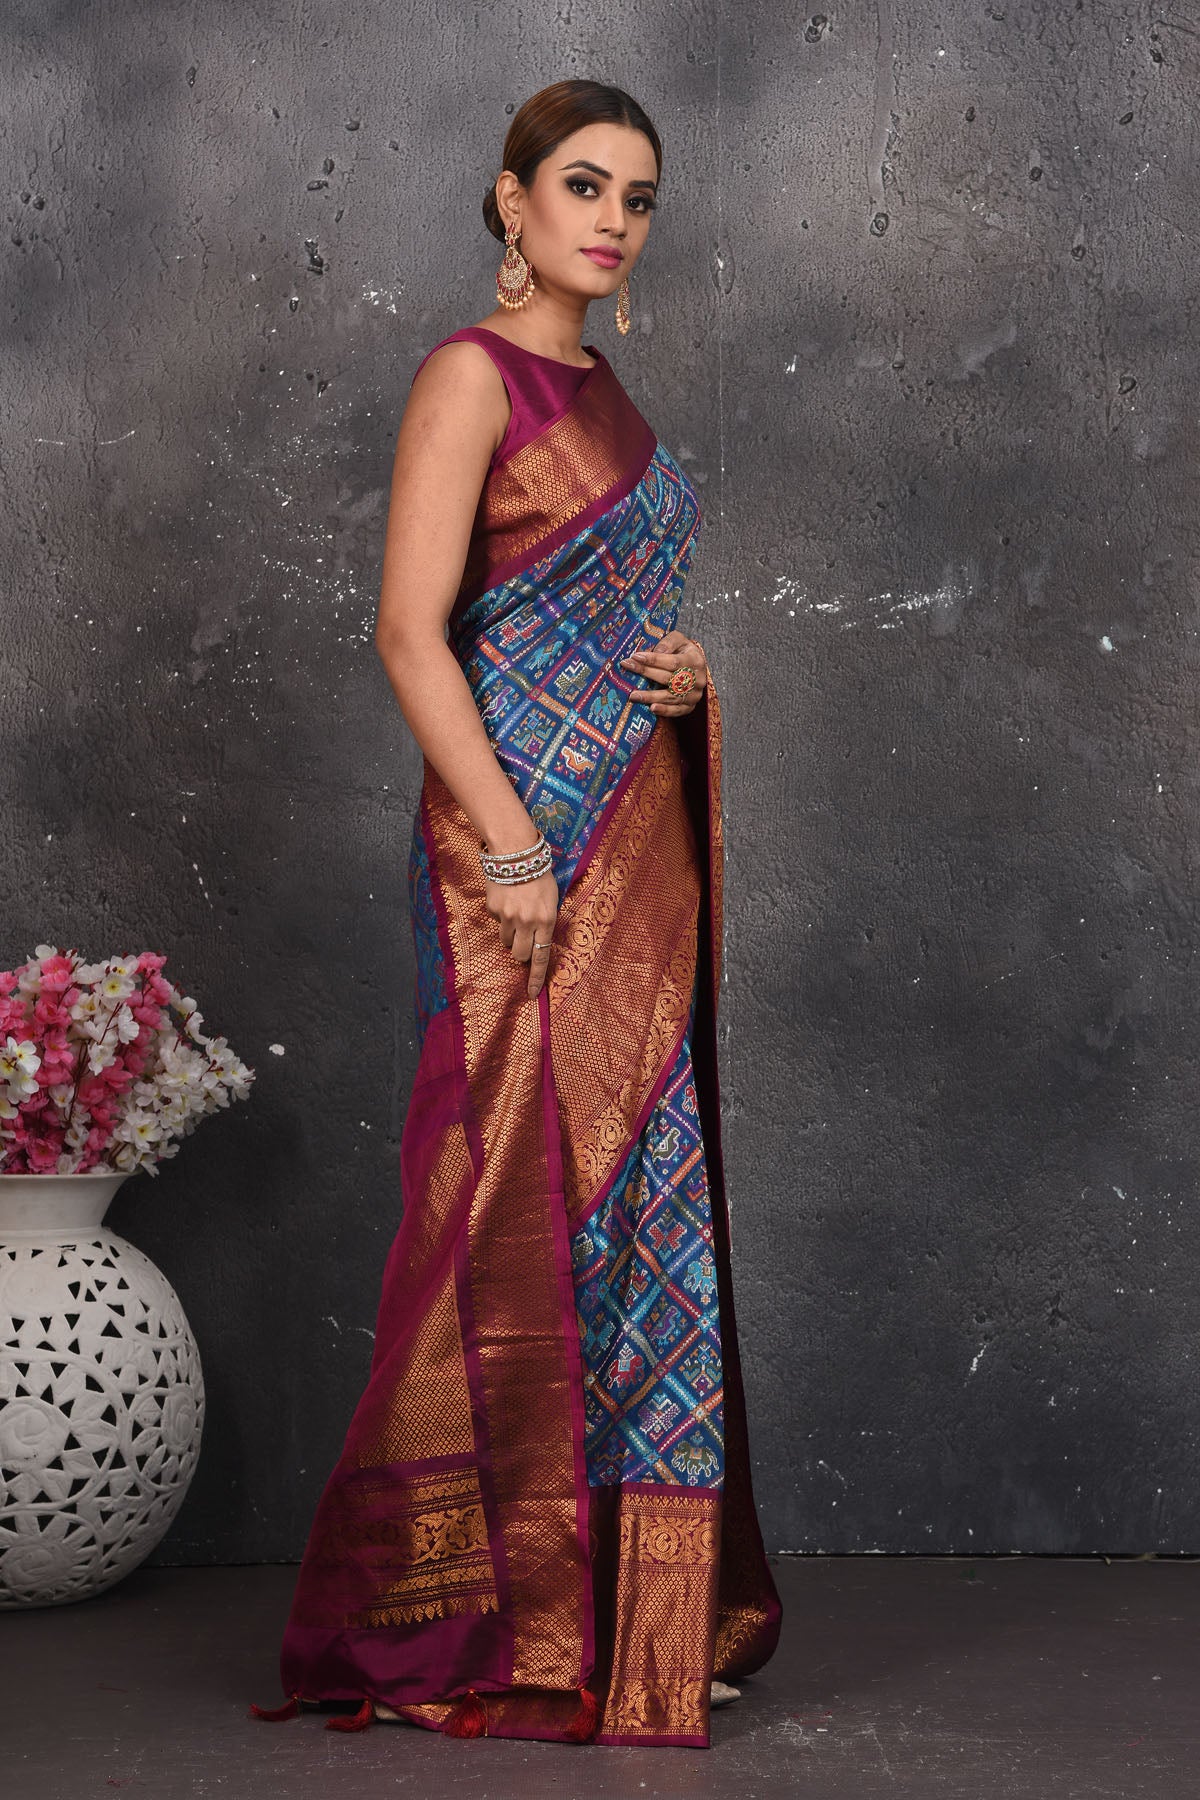 Buy this royal banarasi silk saree with pashmina weaving adorned with antique zari work online in USA which has crafted by skilled weaver of Banaras with elegance and grace, this saree is definitely the epitome of beauty and a must have in your collection. Buy designer handwoven banarasi pashmina sari with any blouse from Pure Elegance Indian saree store in USA.- Side view.